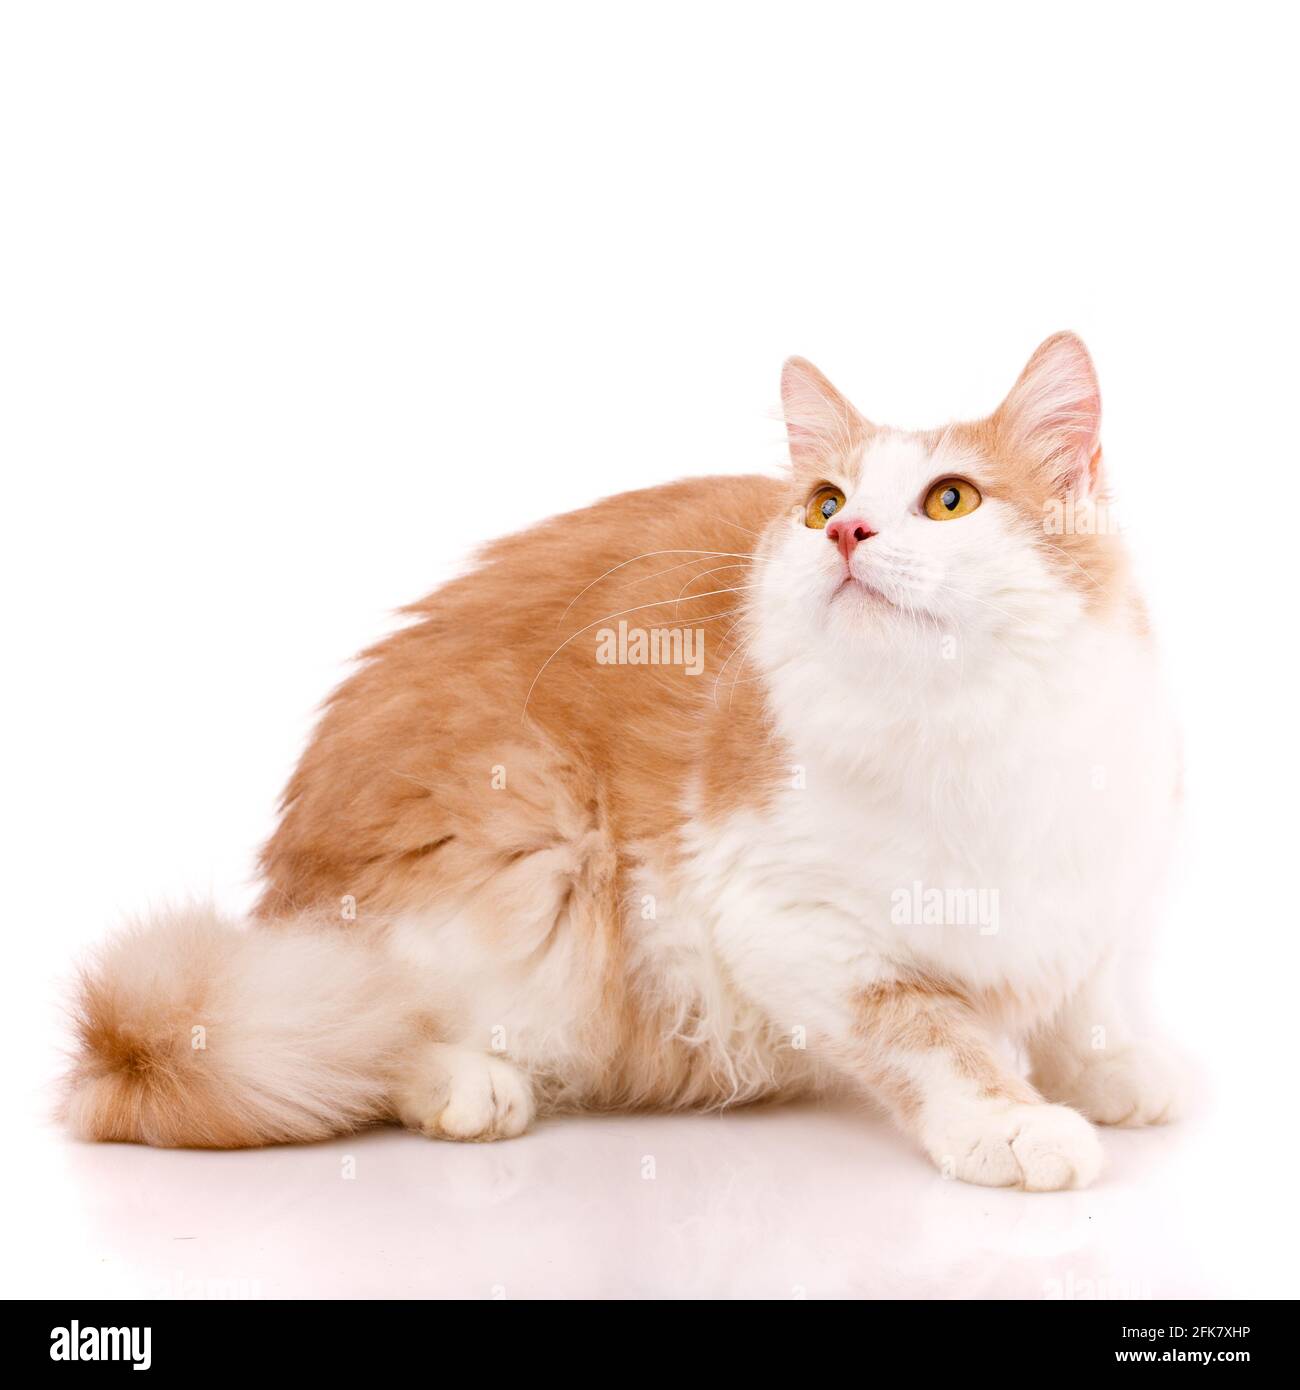 Close up of a domestic cat with red and white fur intently looking up with big eyes. Isolated. Adorable domestic pets. Concept template for website or Stock Photo